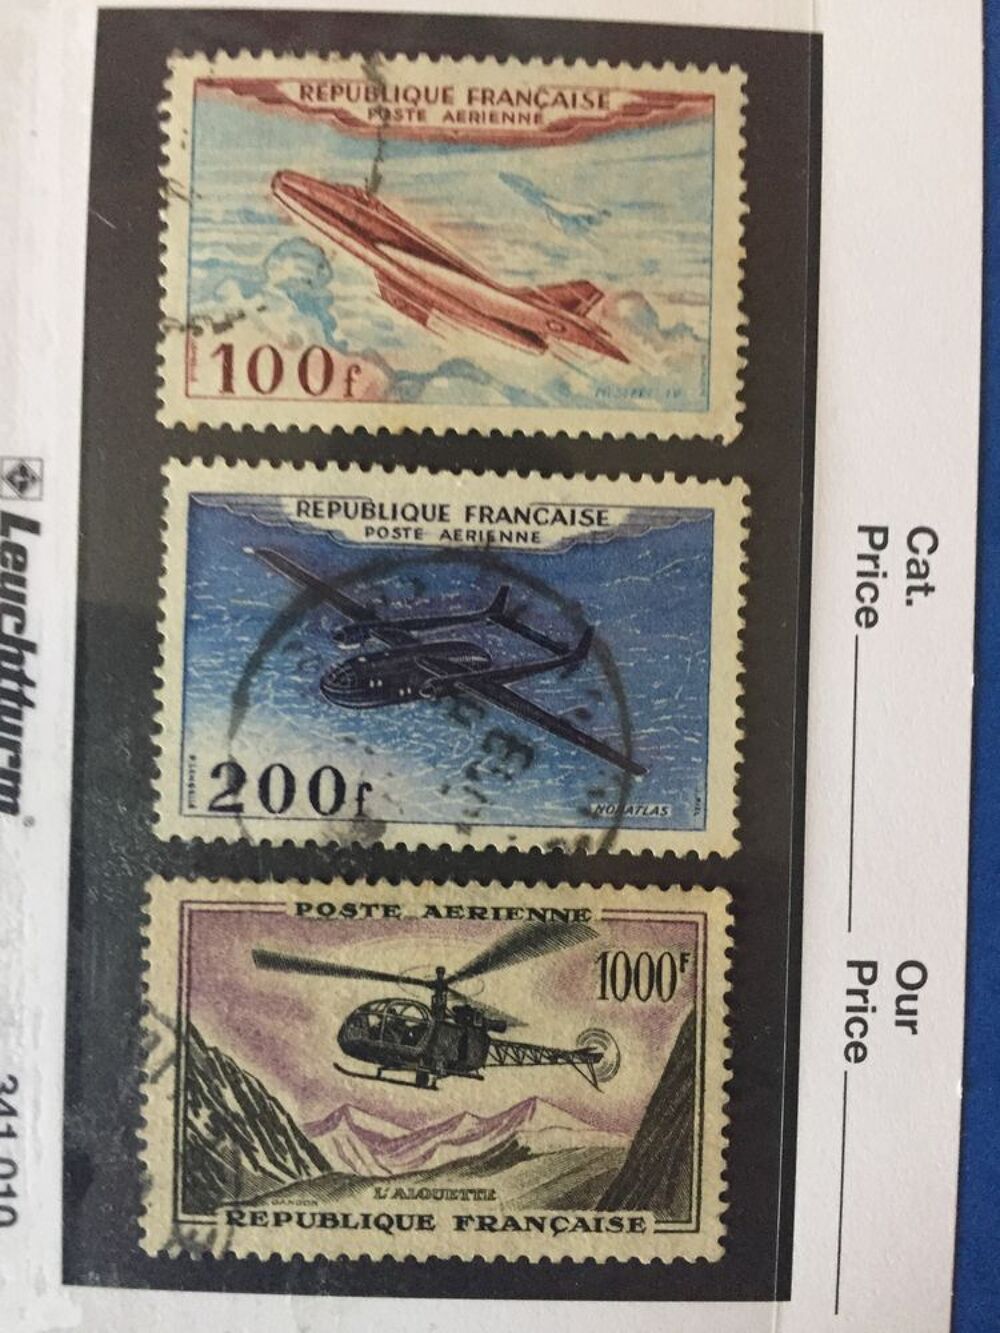 TIMBRES FRANCE POSTE AERIENNE 